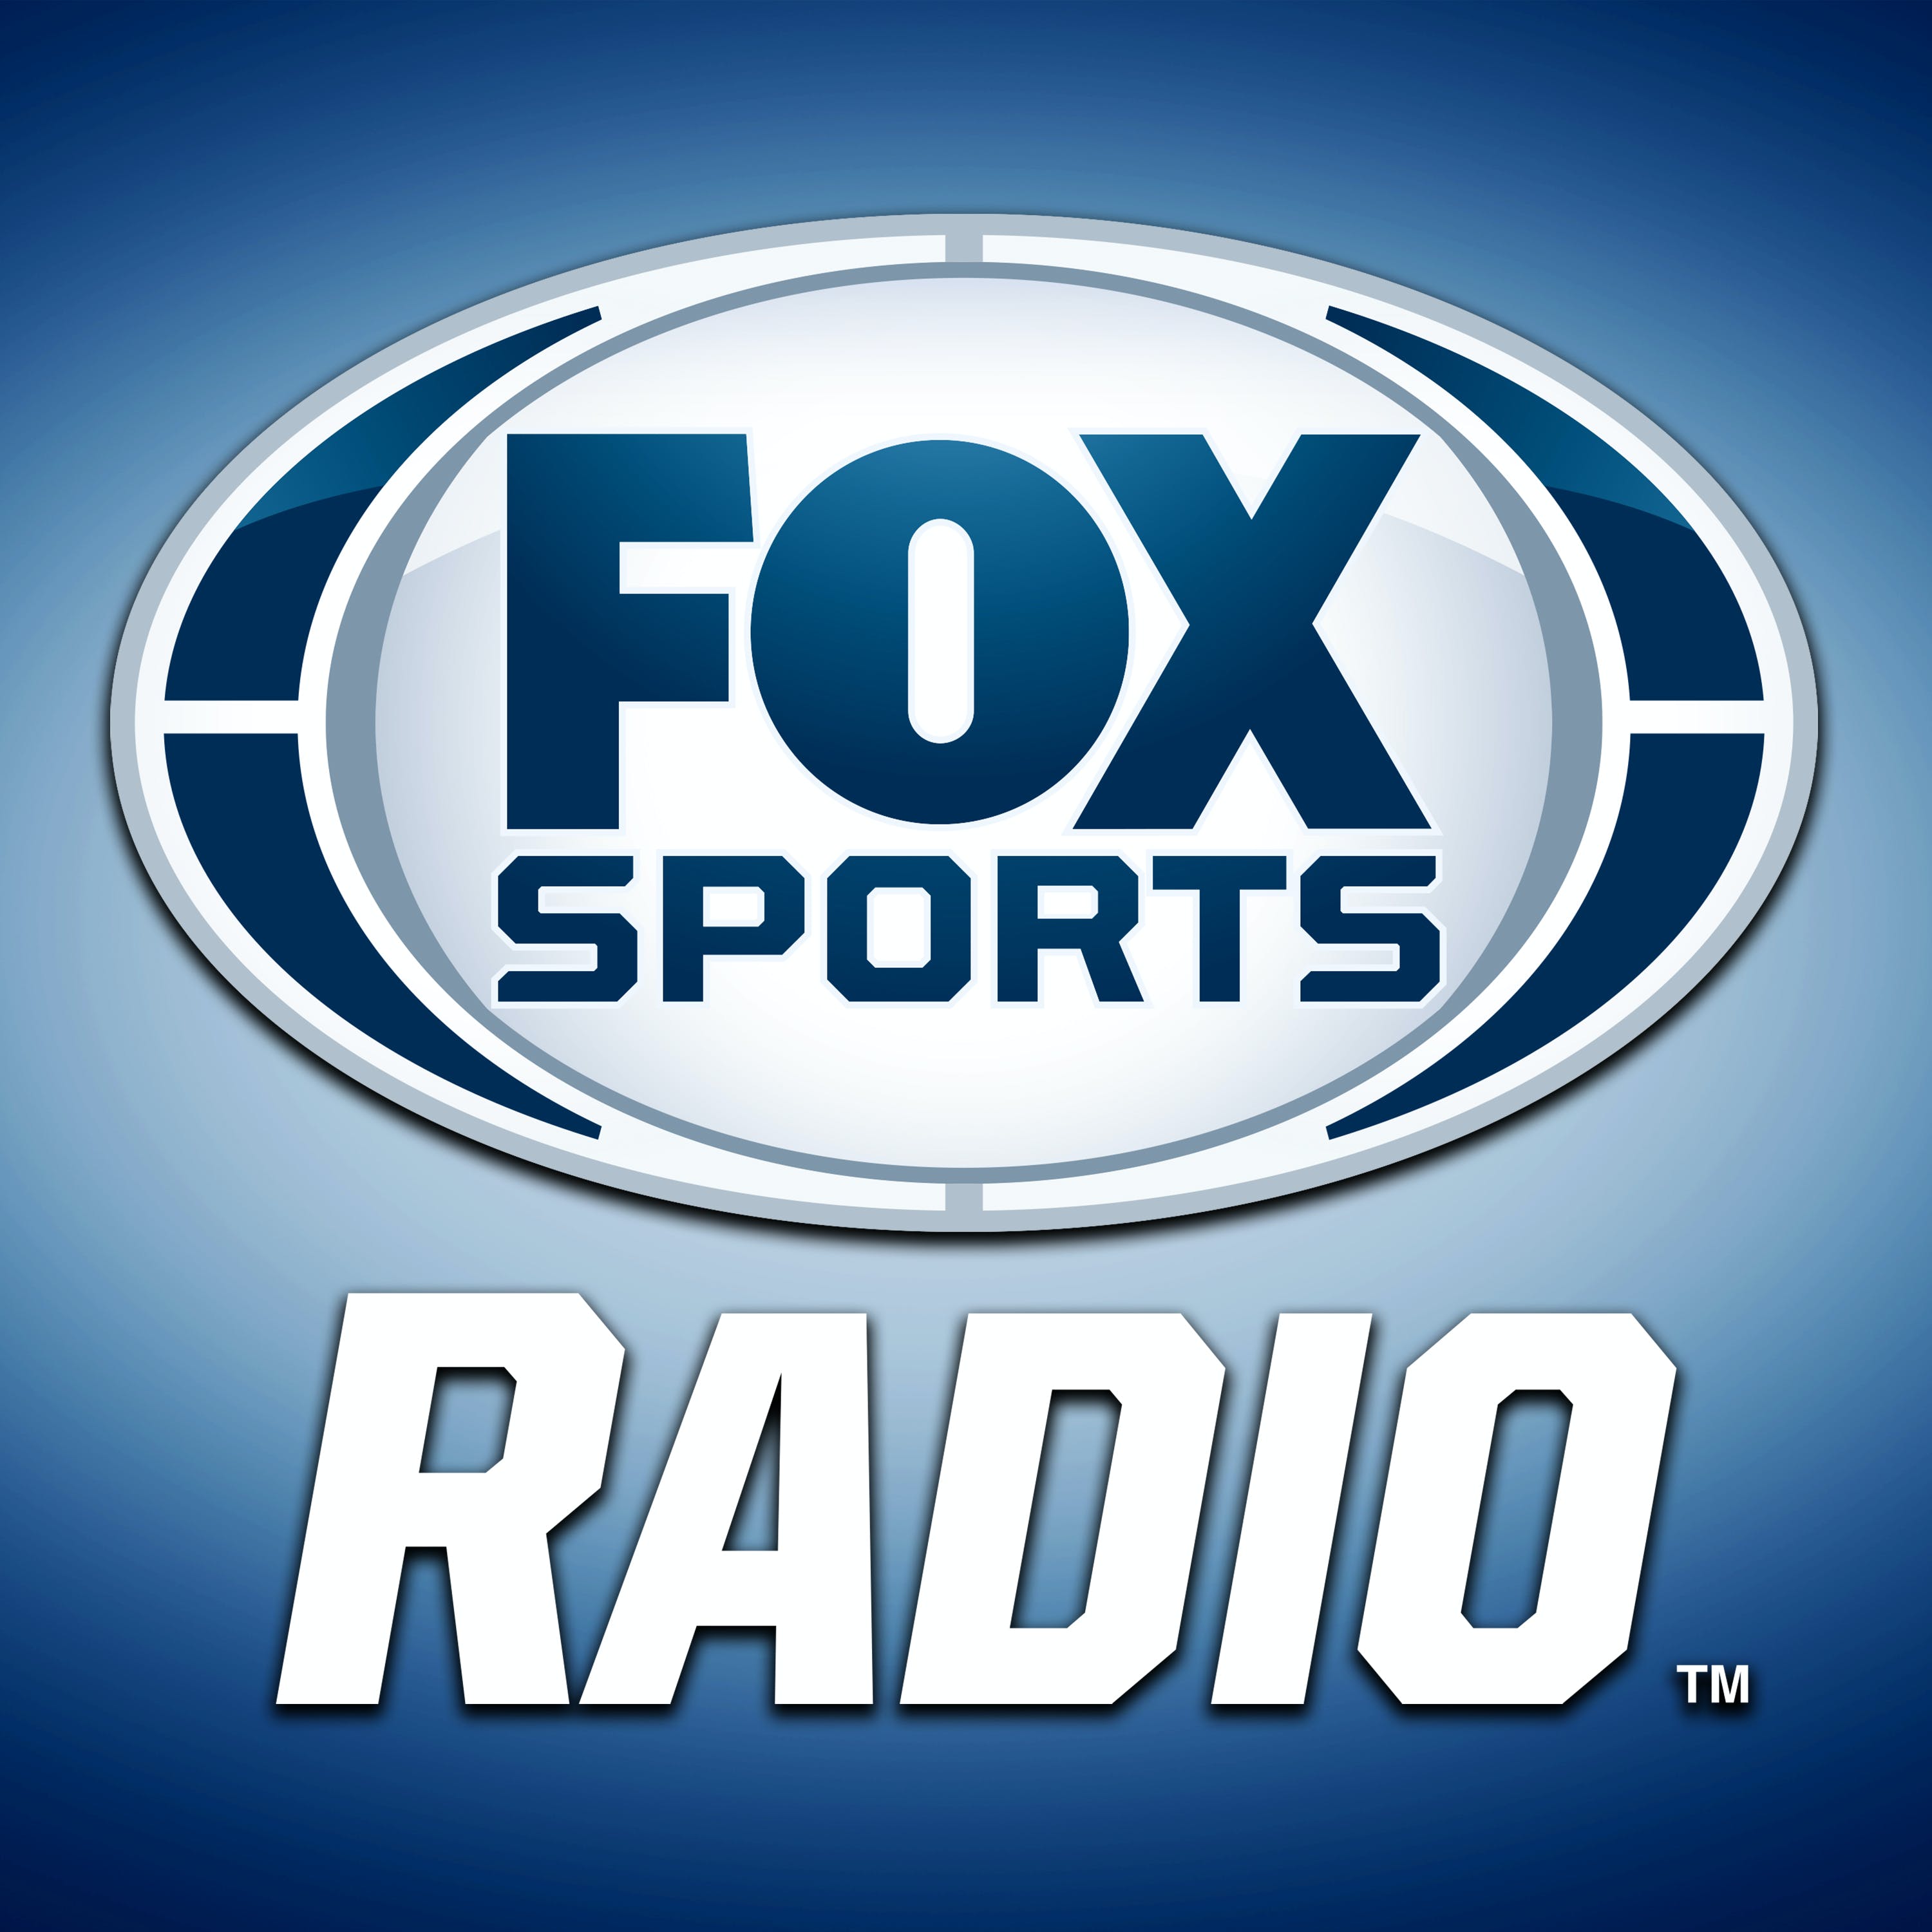 01/16/2021 - FOX Football Saturday with Arnie Spanier and Aaron Torres - NFL Playoffs Divisional Round